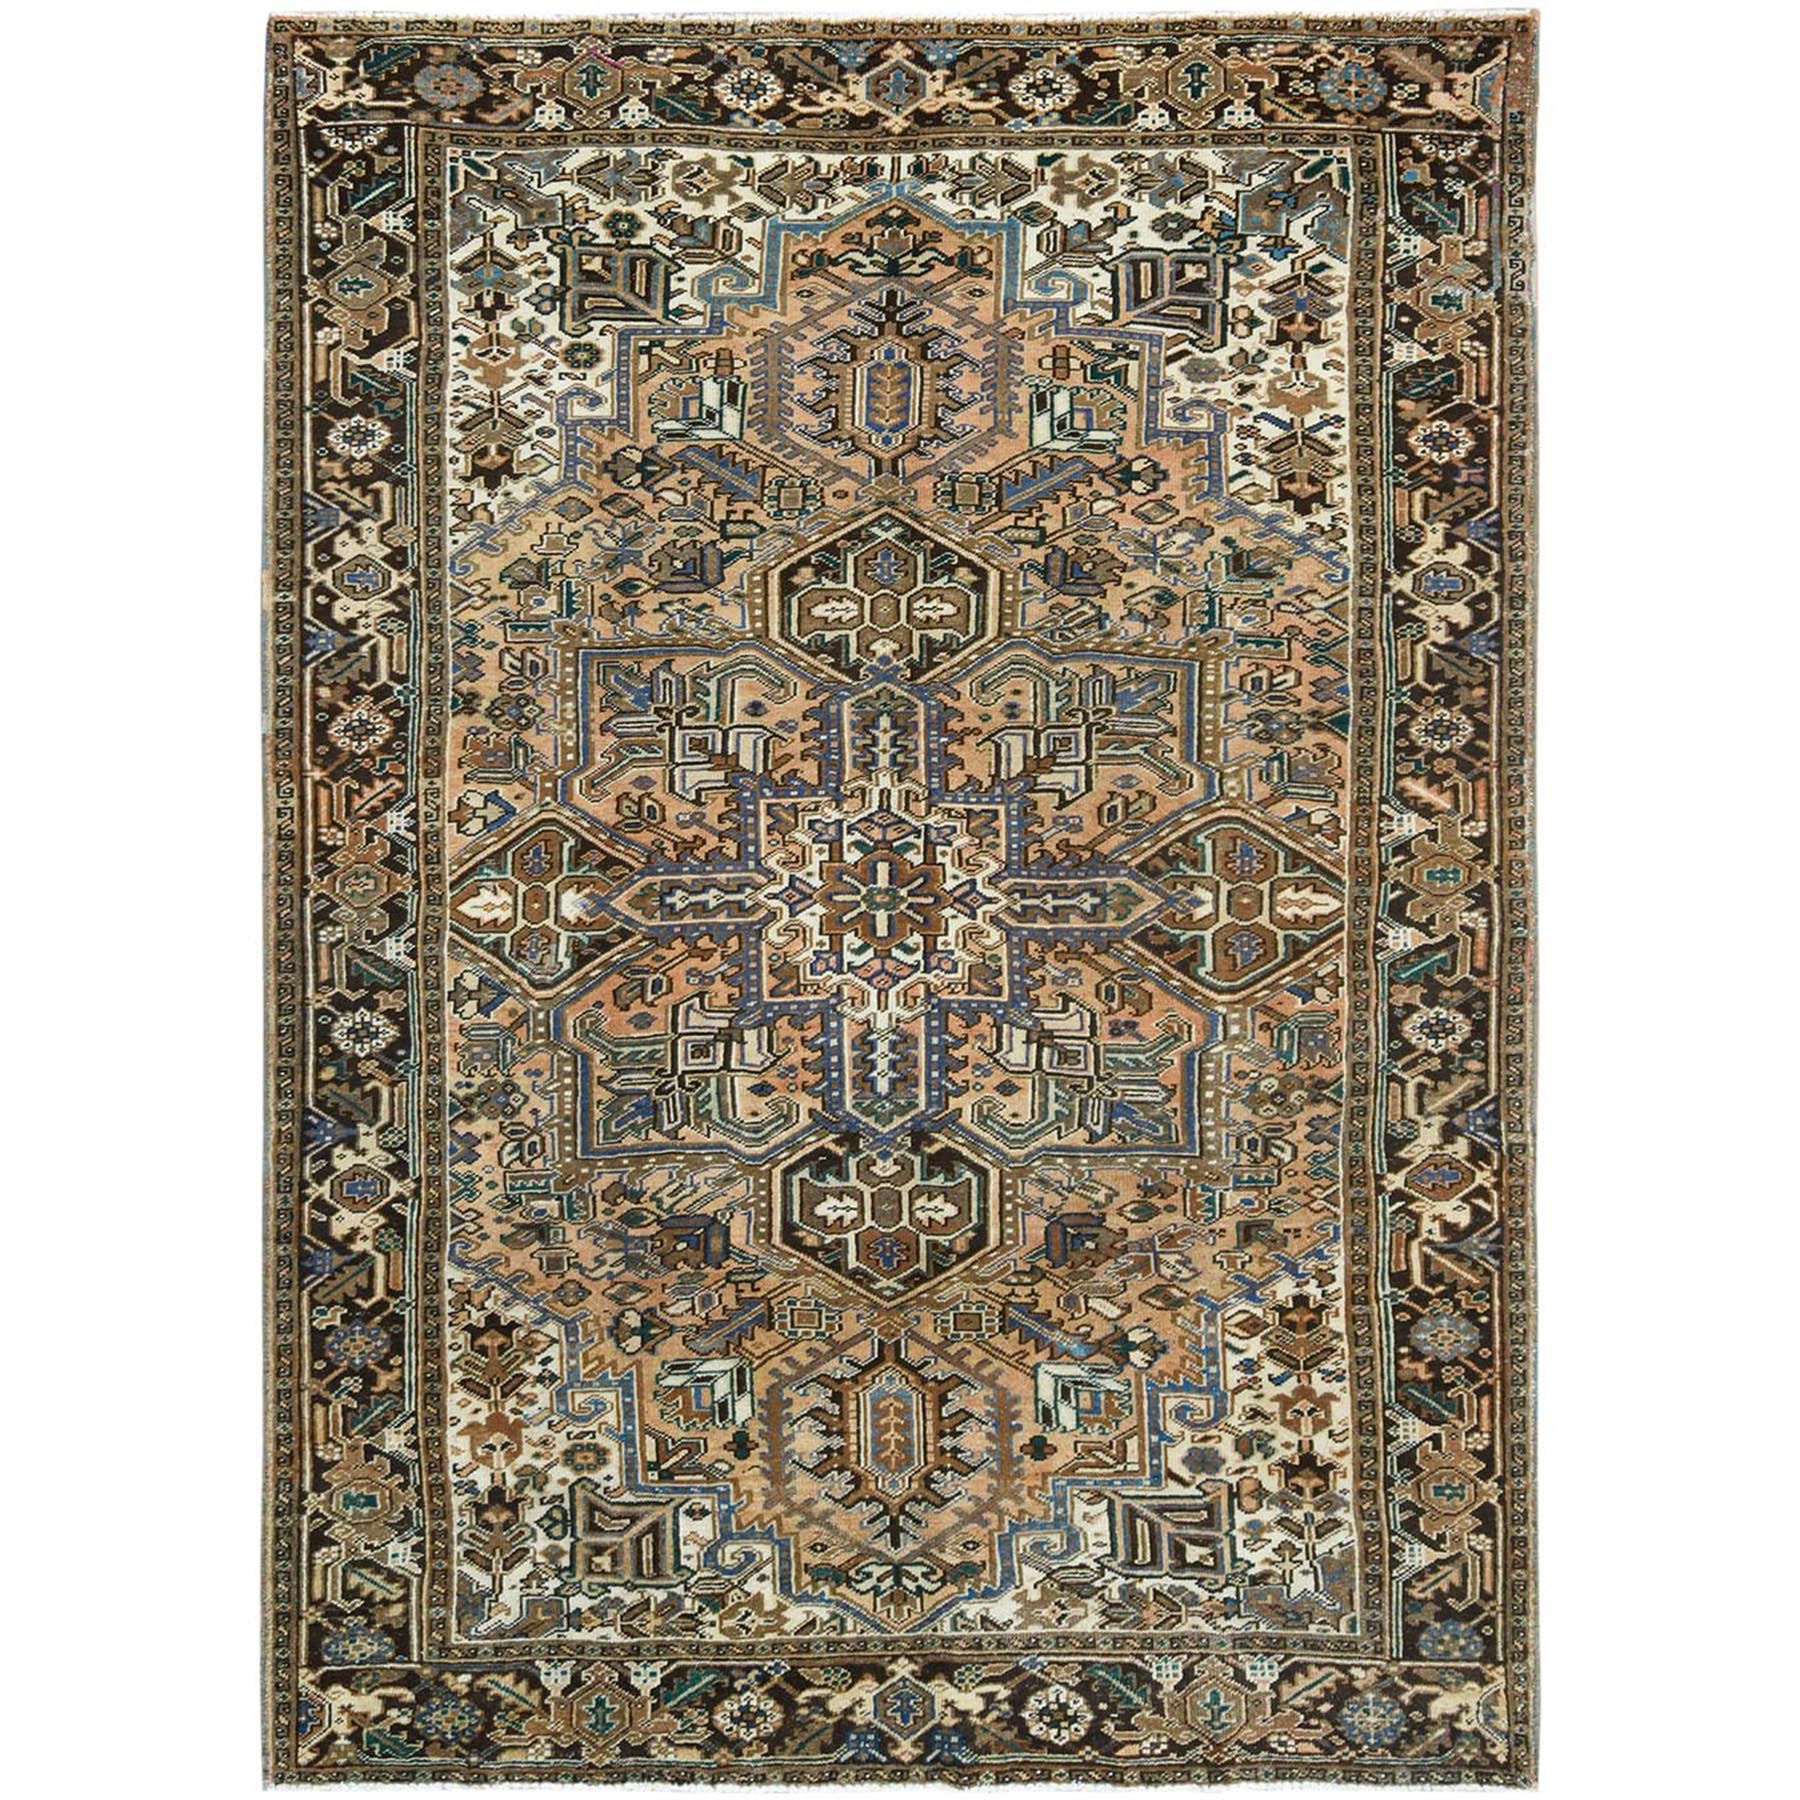  Wool Hand-Knotted Area Rug 7'5